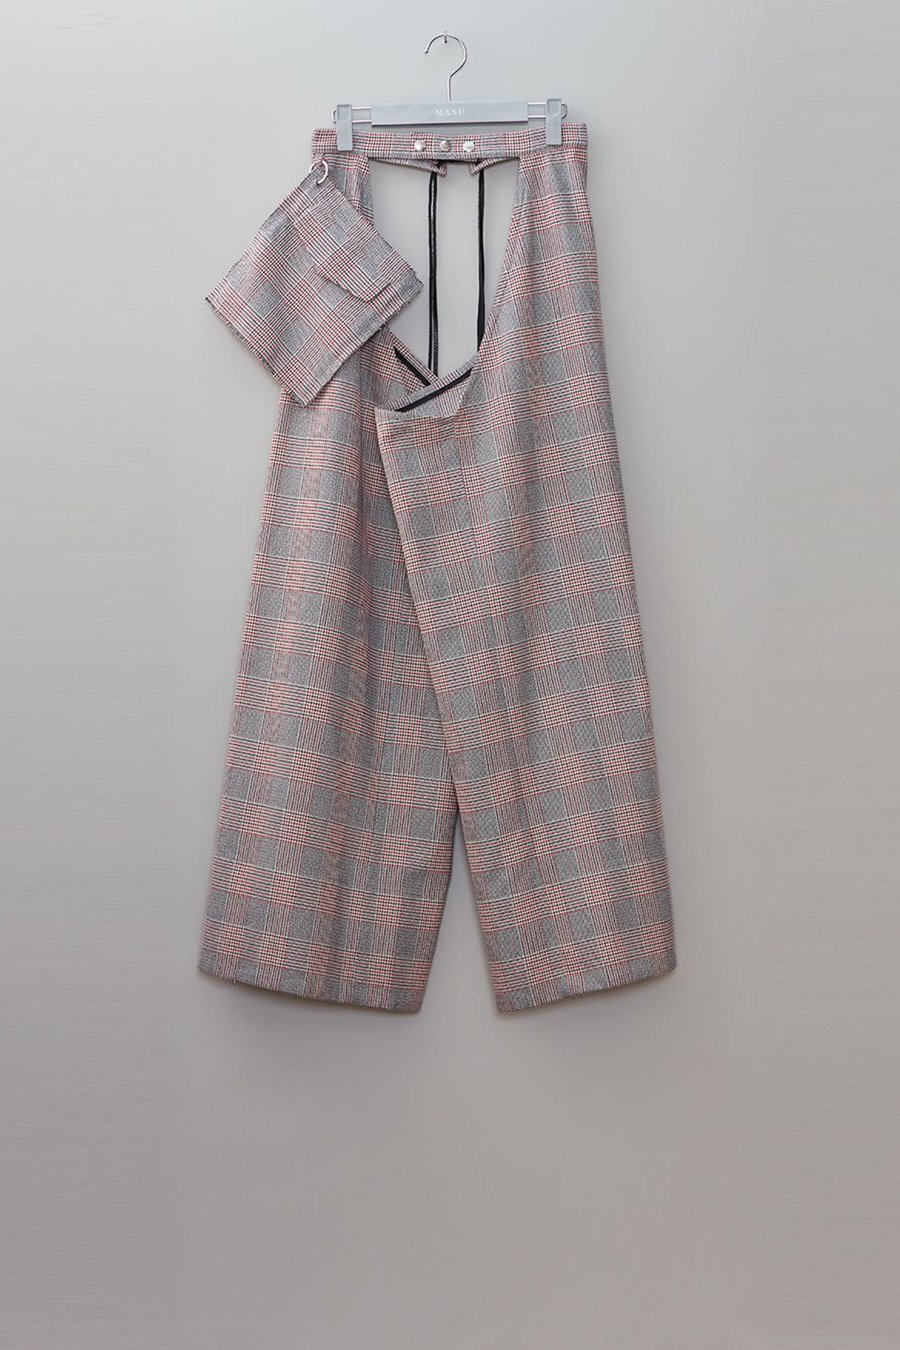 MASU  GLEN PLAID WIDE CHAPS(RED)<img class='new_mark_img2' src='https://img.shop-pro.jp/img/new/icons15.gif' style='border:none;display:inline;margin:0px;padding:0px;width:auto;' />